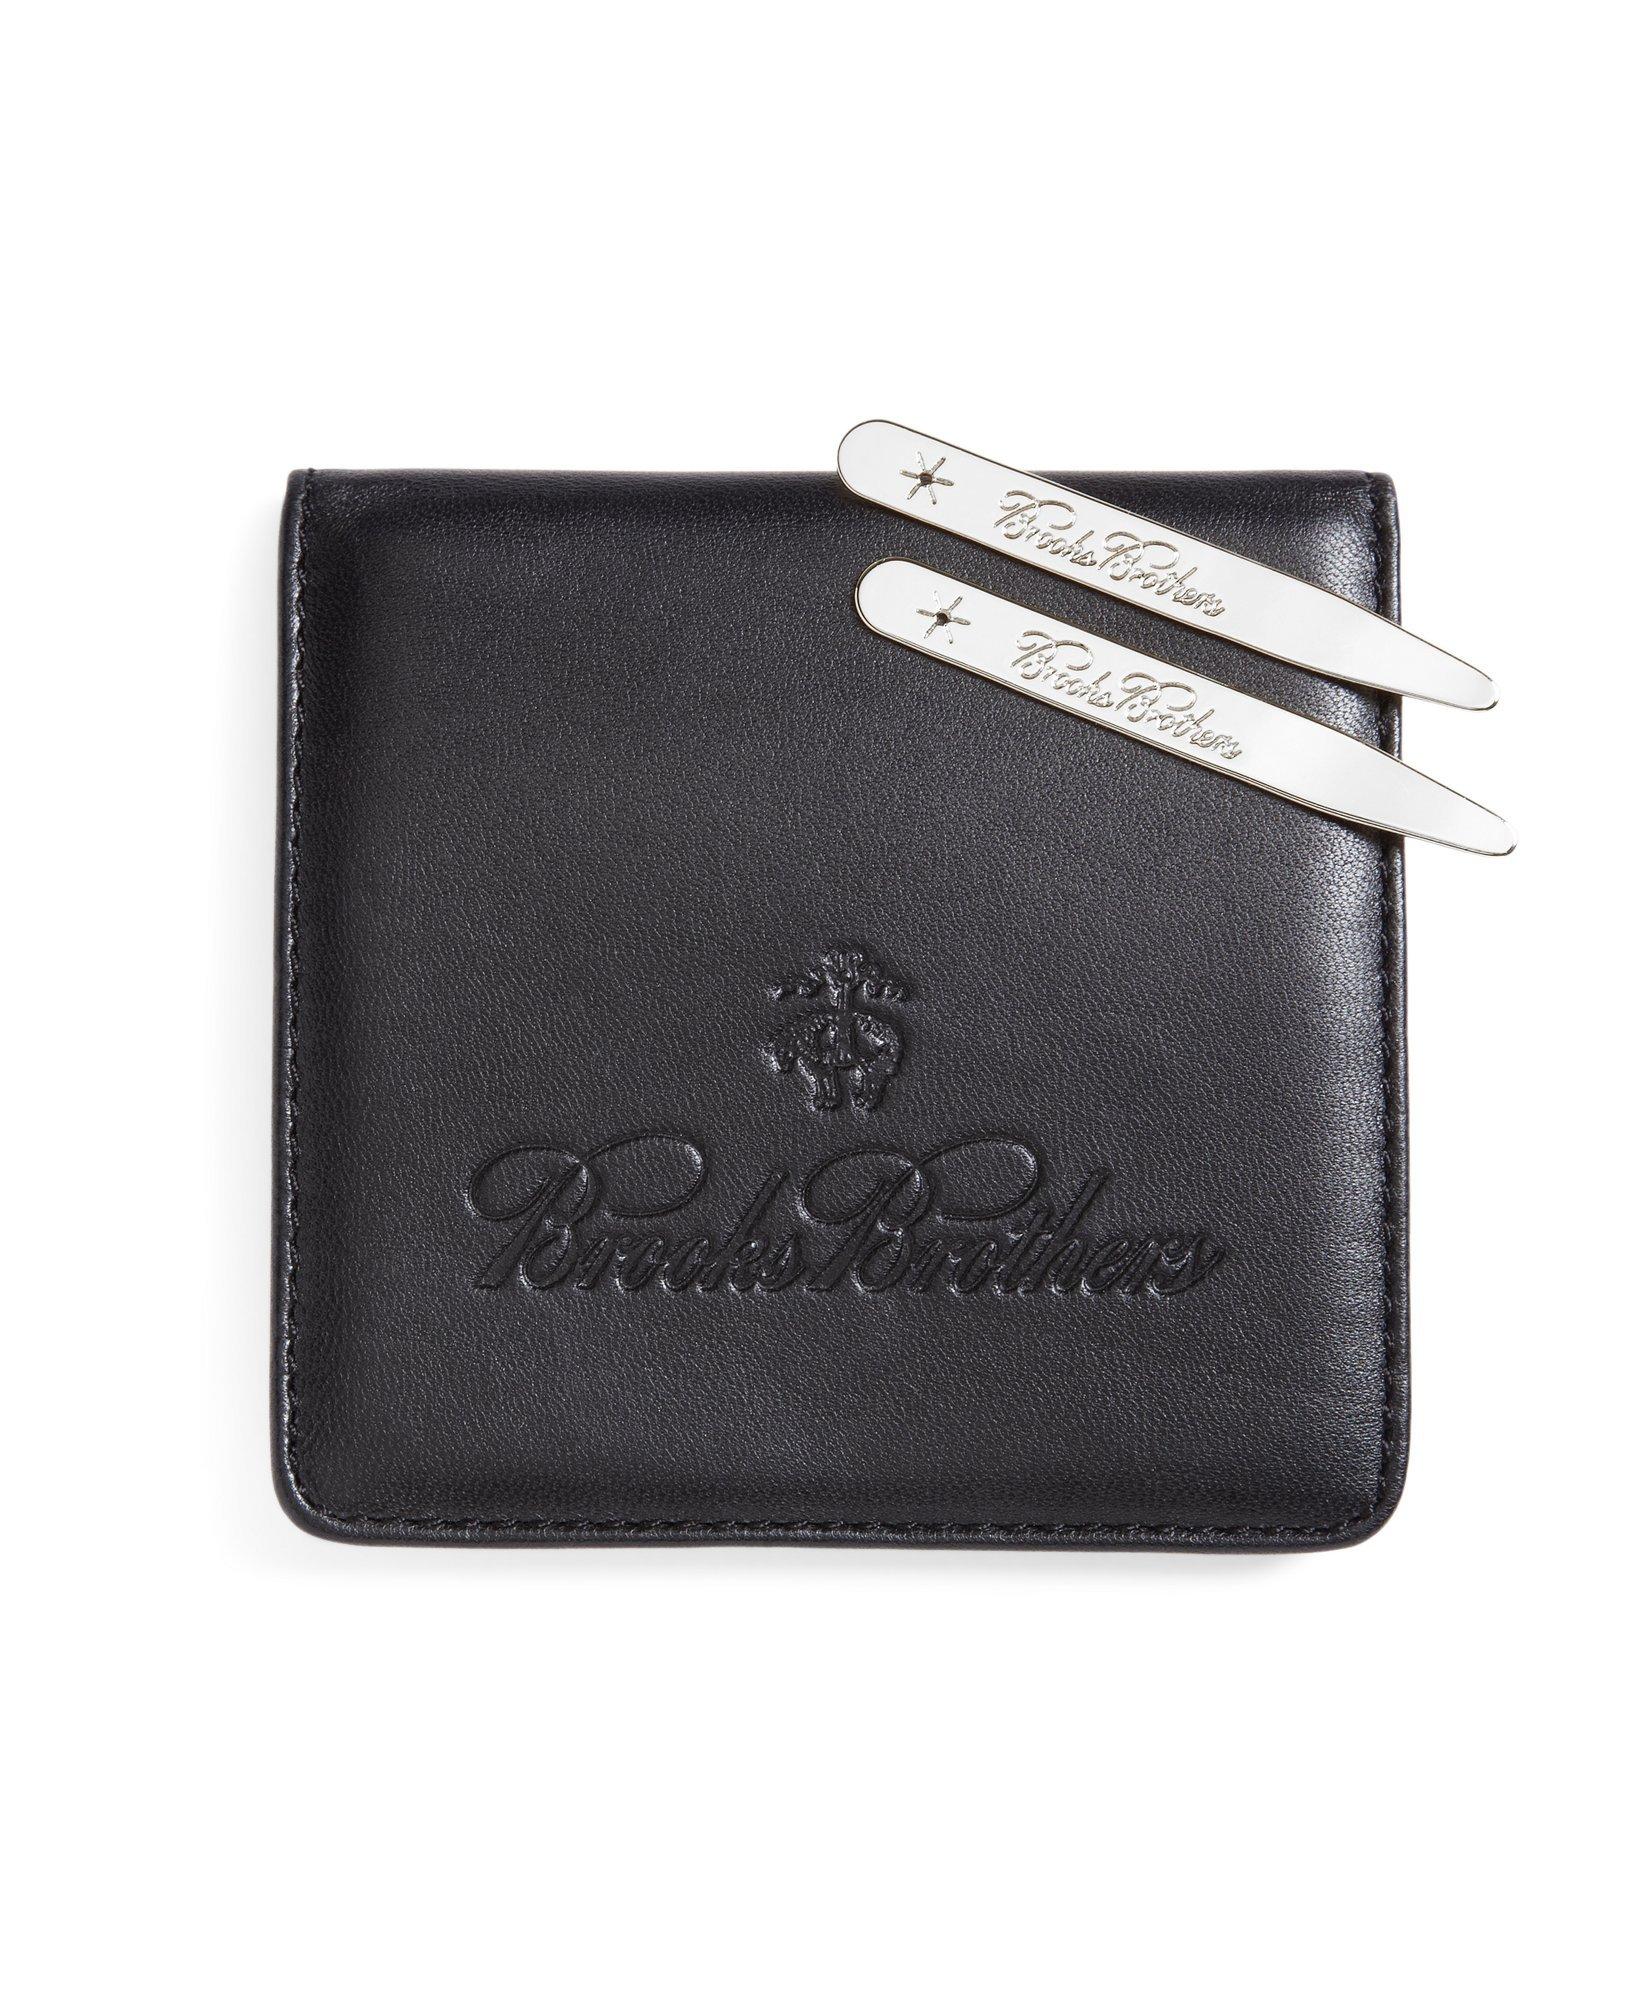 Brooks Brothers Metallic Collar Stays With Nappa Leather Case | Silver